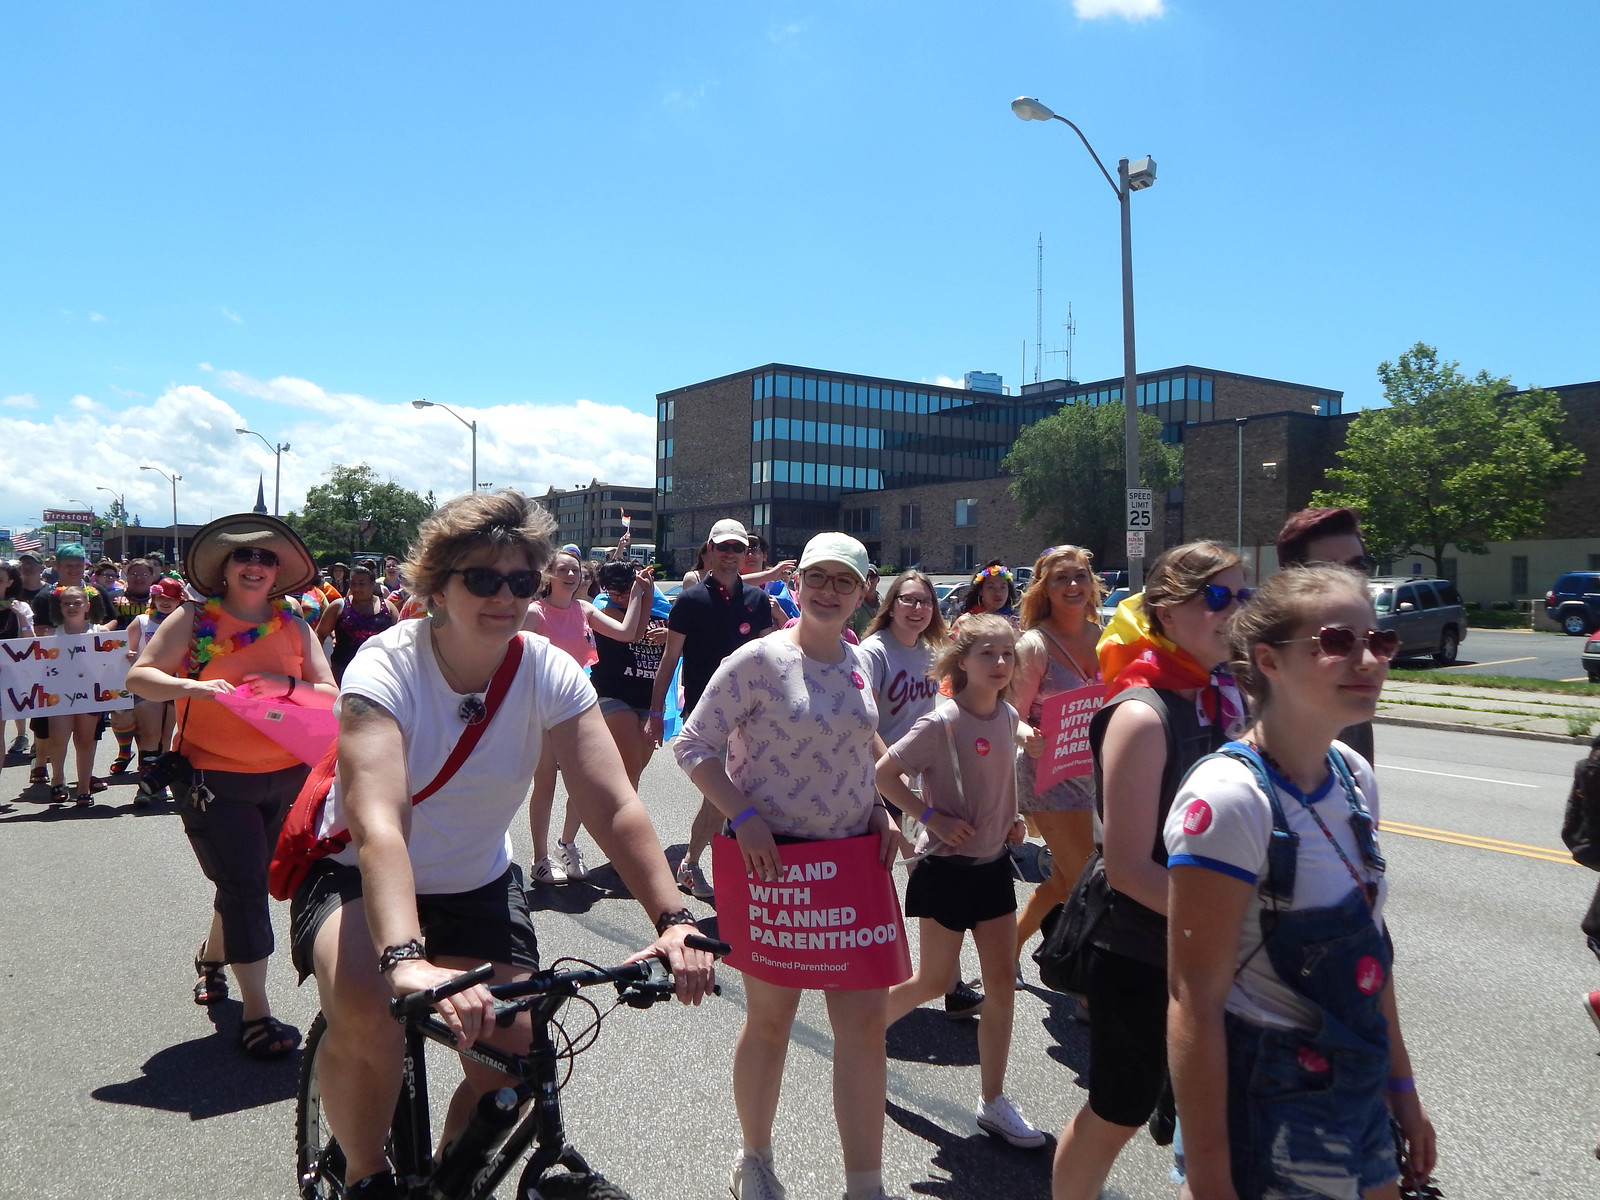 Planned Parenthood in Pride Parade